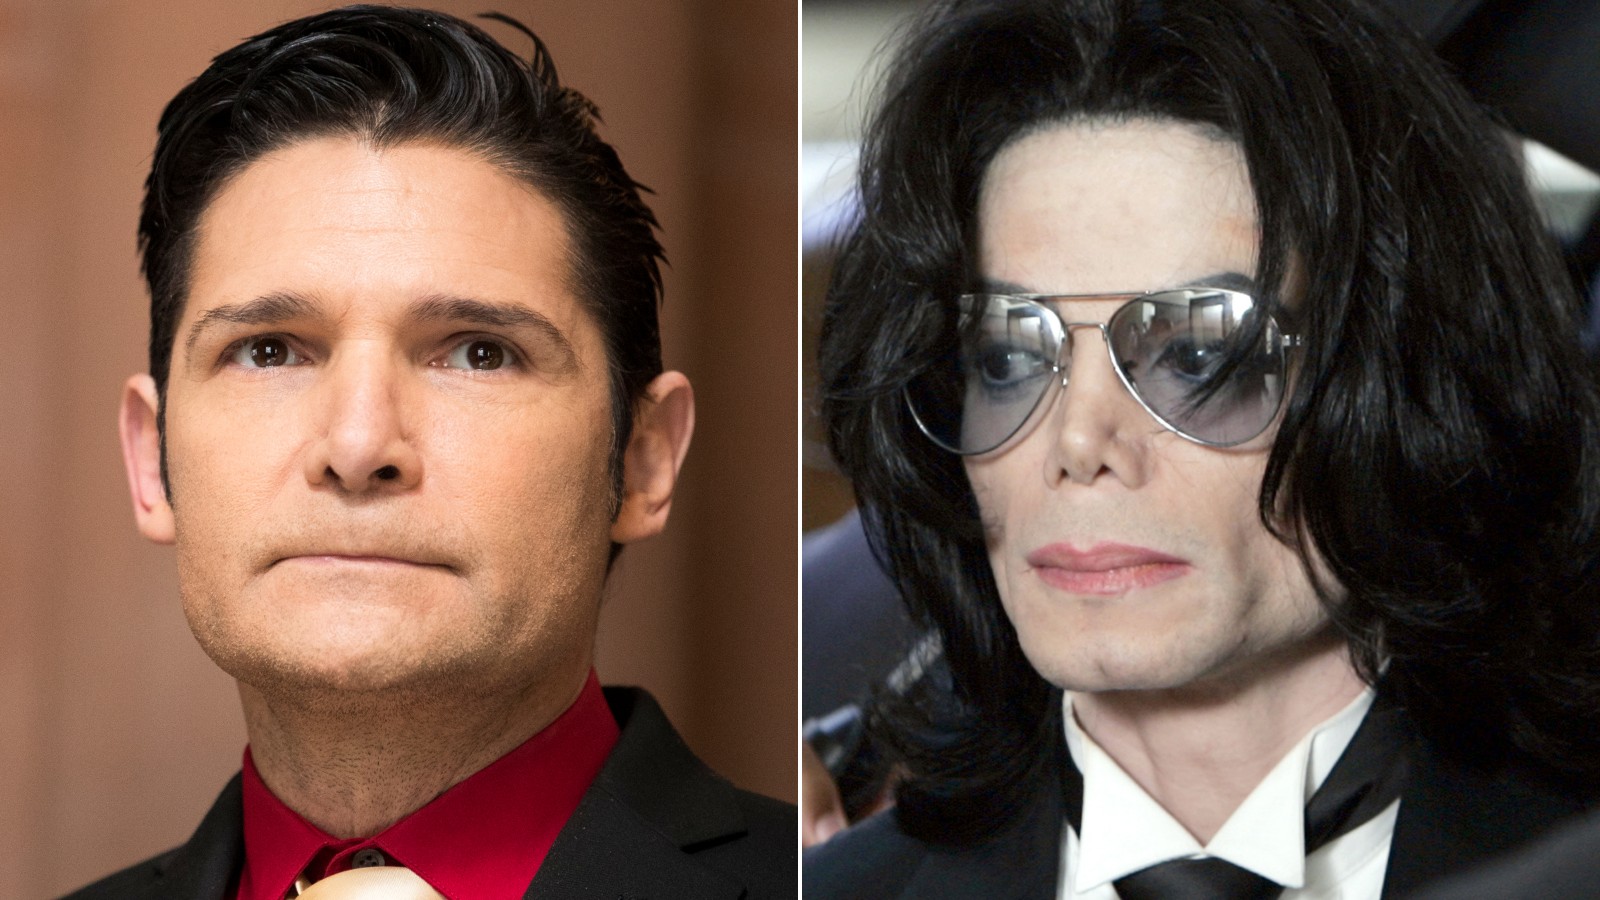 What is wrong with corey feldman